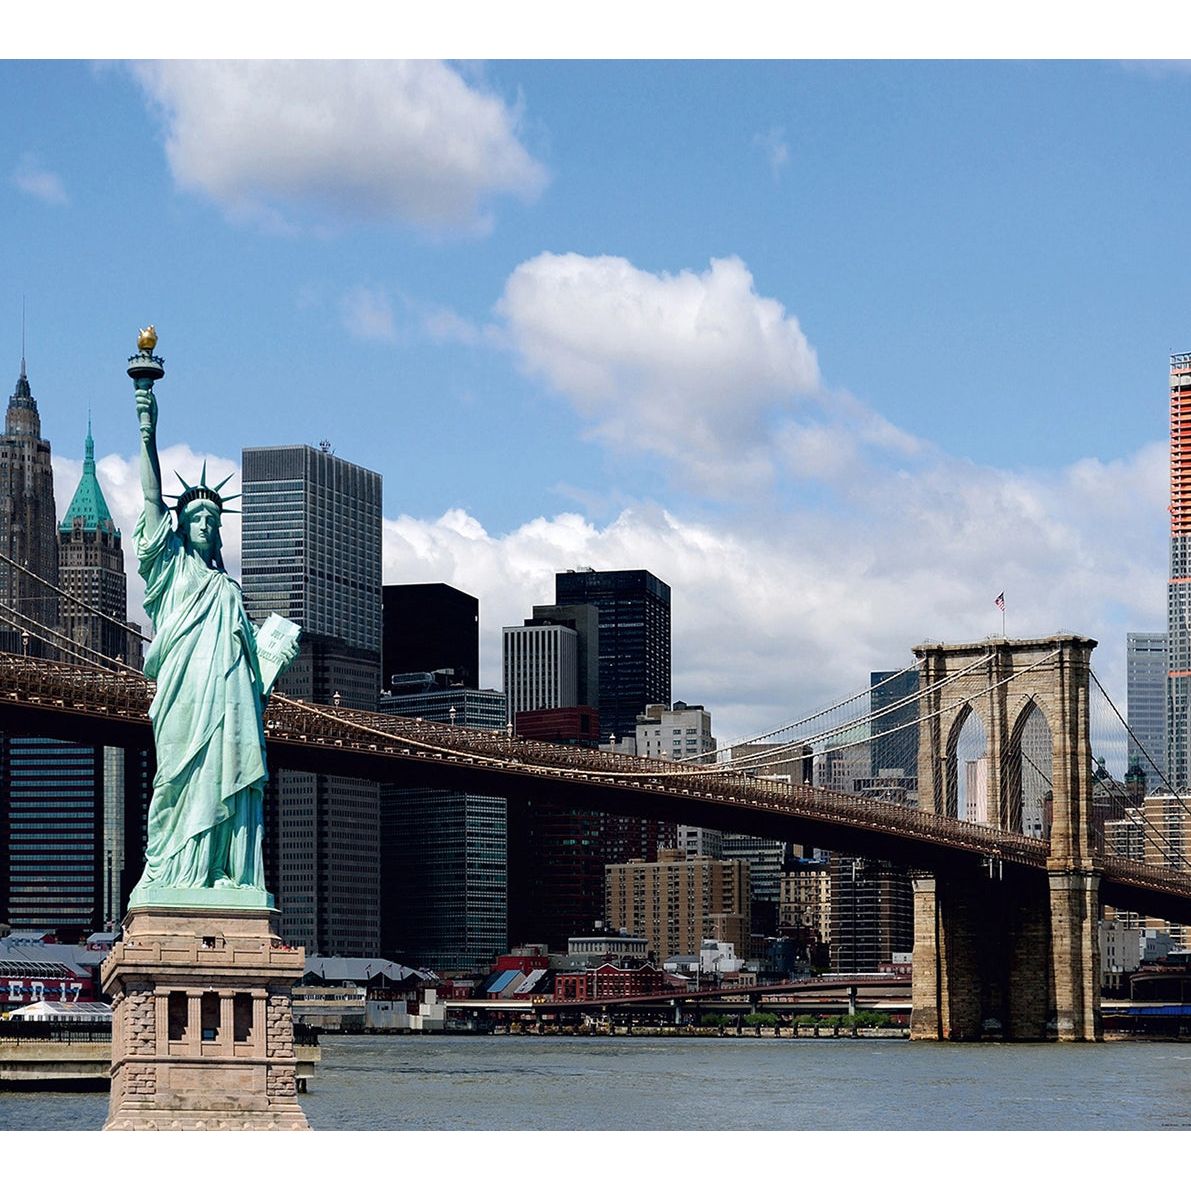 Statue of Liberty: NYC Waterfront View Wall Mural